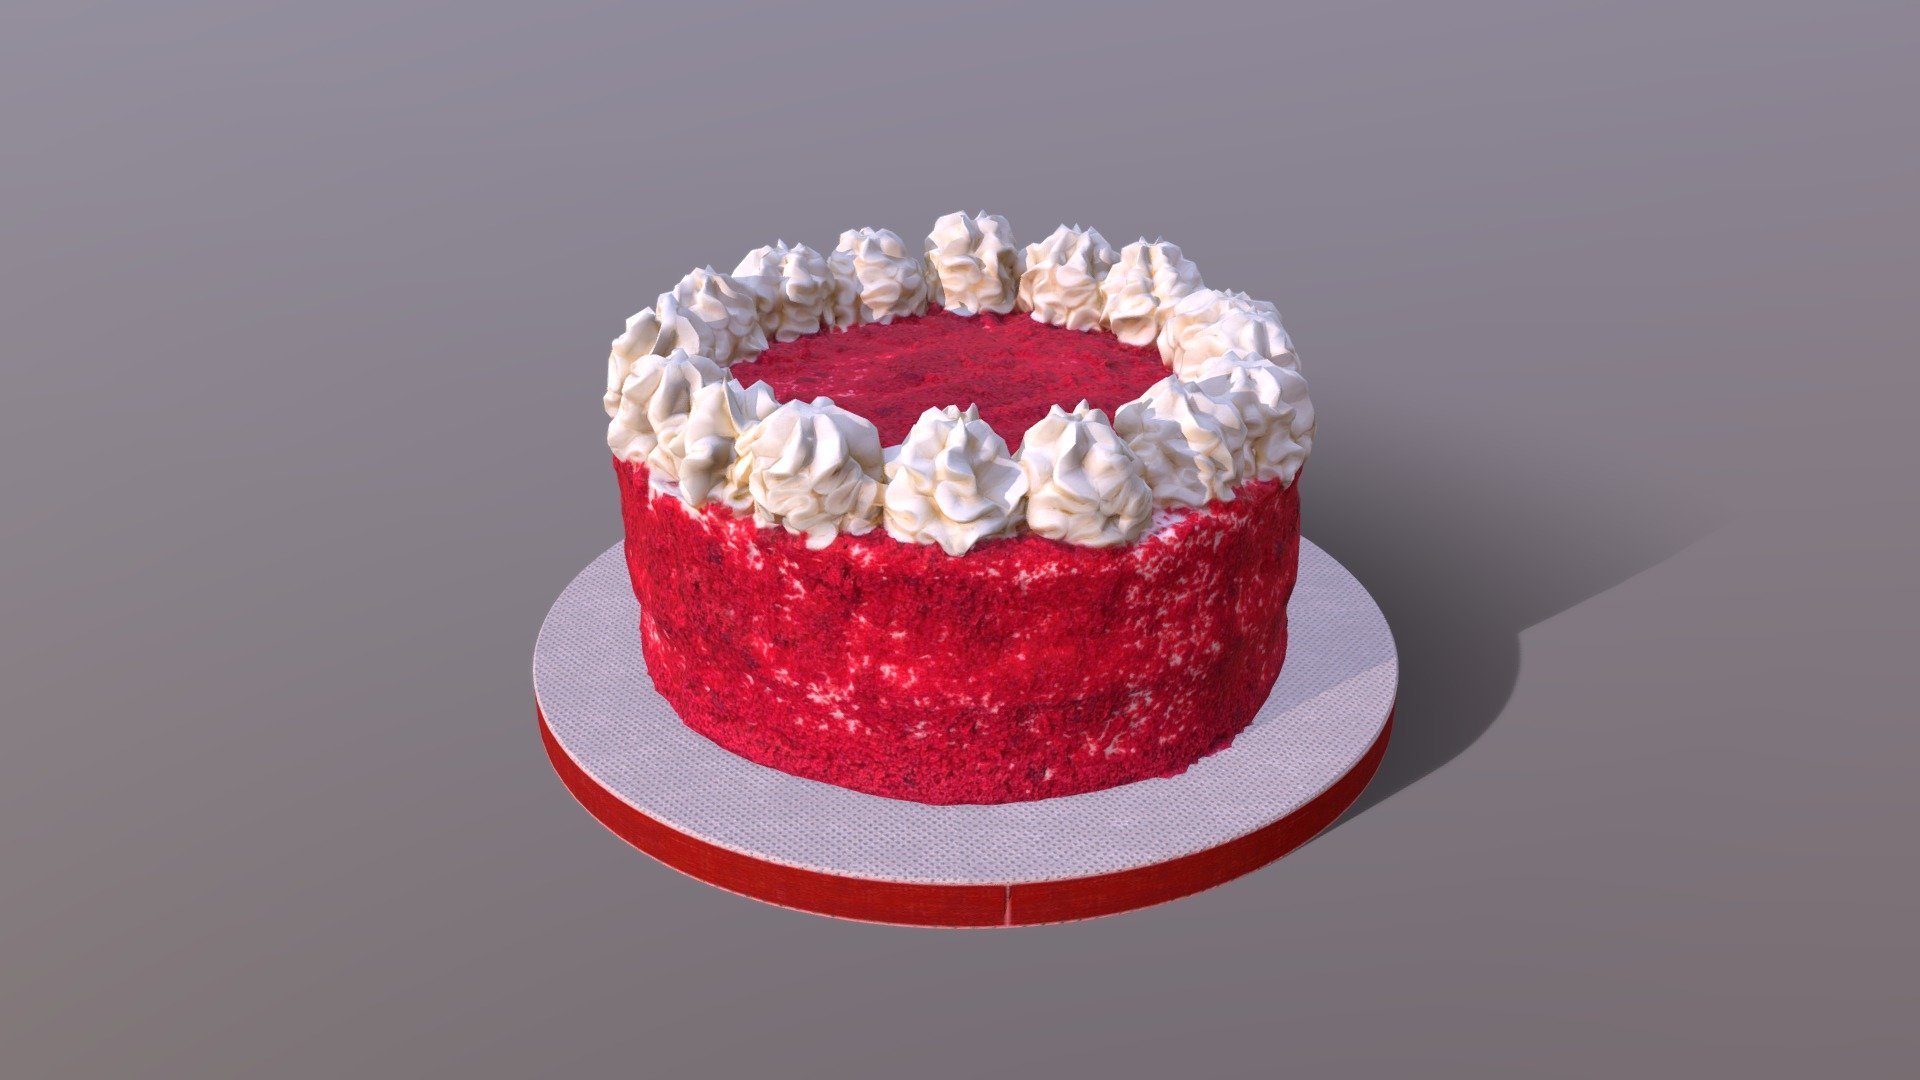 This premium Red Velvet Cake model was created using photogrammetry which is made by CAKESBURG Premium Cake Shop in the UK. You can purchase real cake from this link: https://cakesburg.co.uk/products/red-velvet-buttercream-cake?_pos=2&amp;_sid=a9ff9af21&amp;_ss=r

Textures 4096*4096px PBR photoscan-based materials Base Color, Normal, Roughness, Specular)Published by 3ds Max

Click here for the the cut &amp; slice version.

Click here for a slice of cake model 3d model